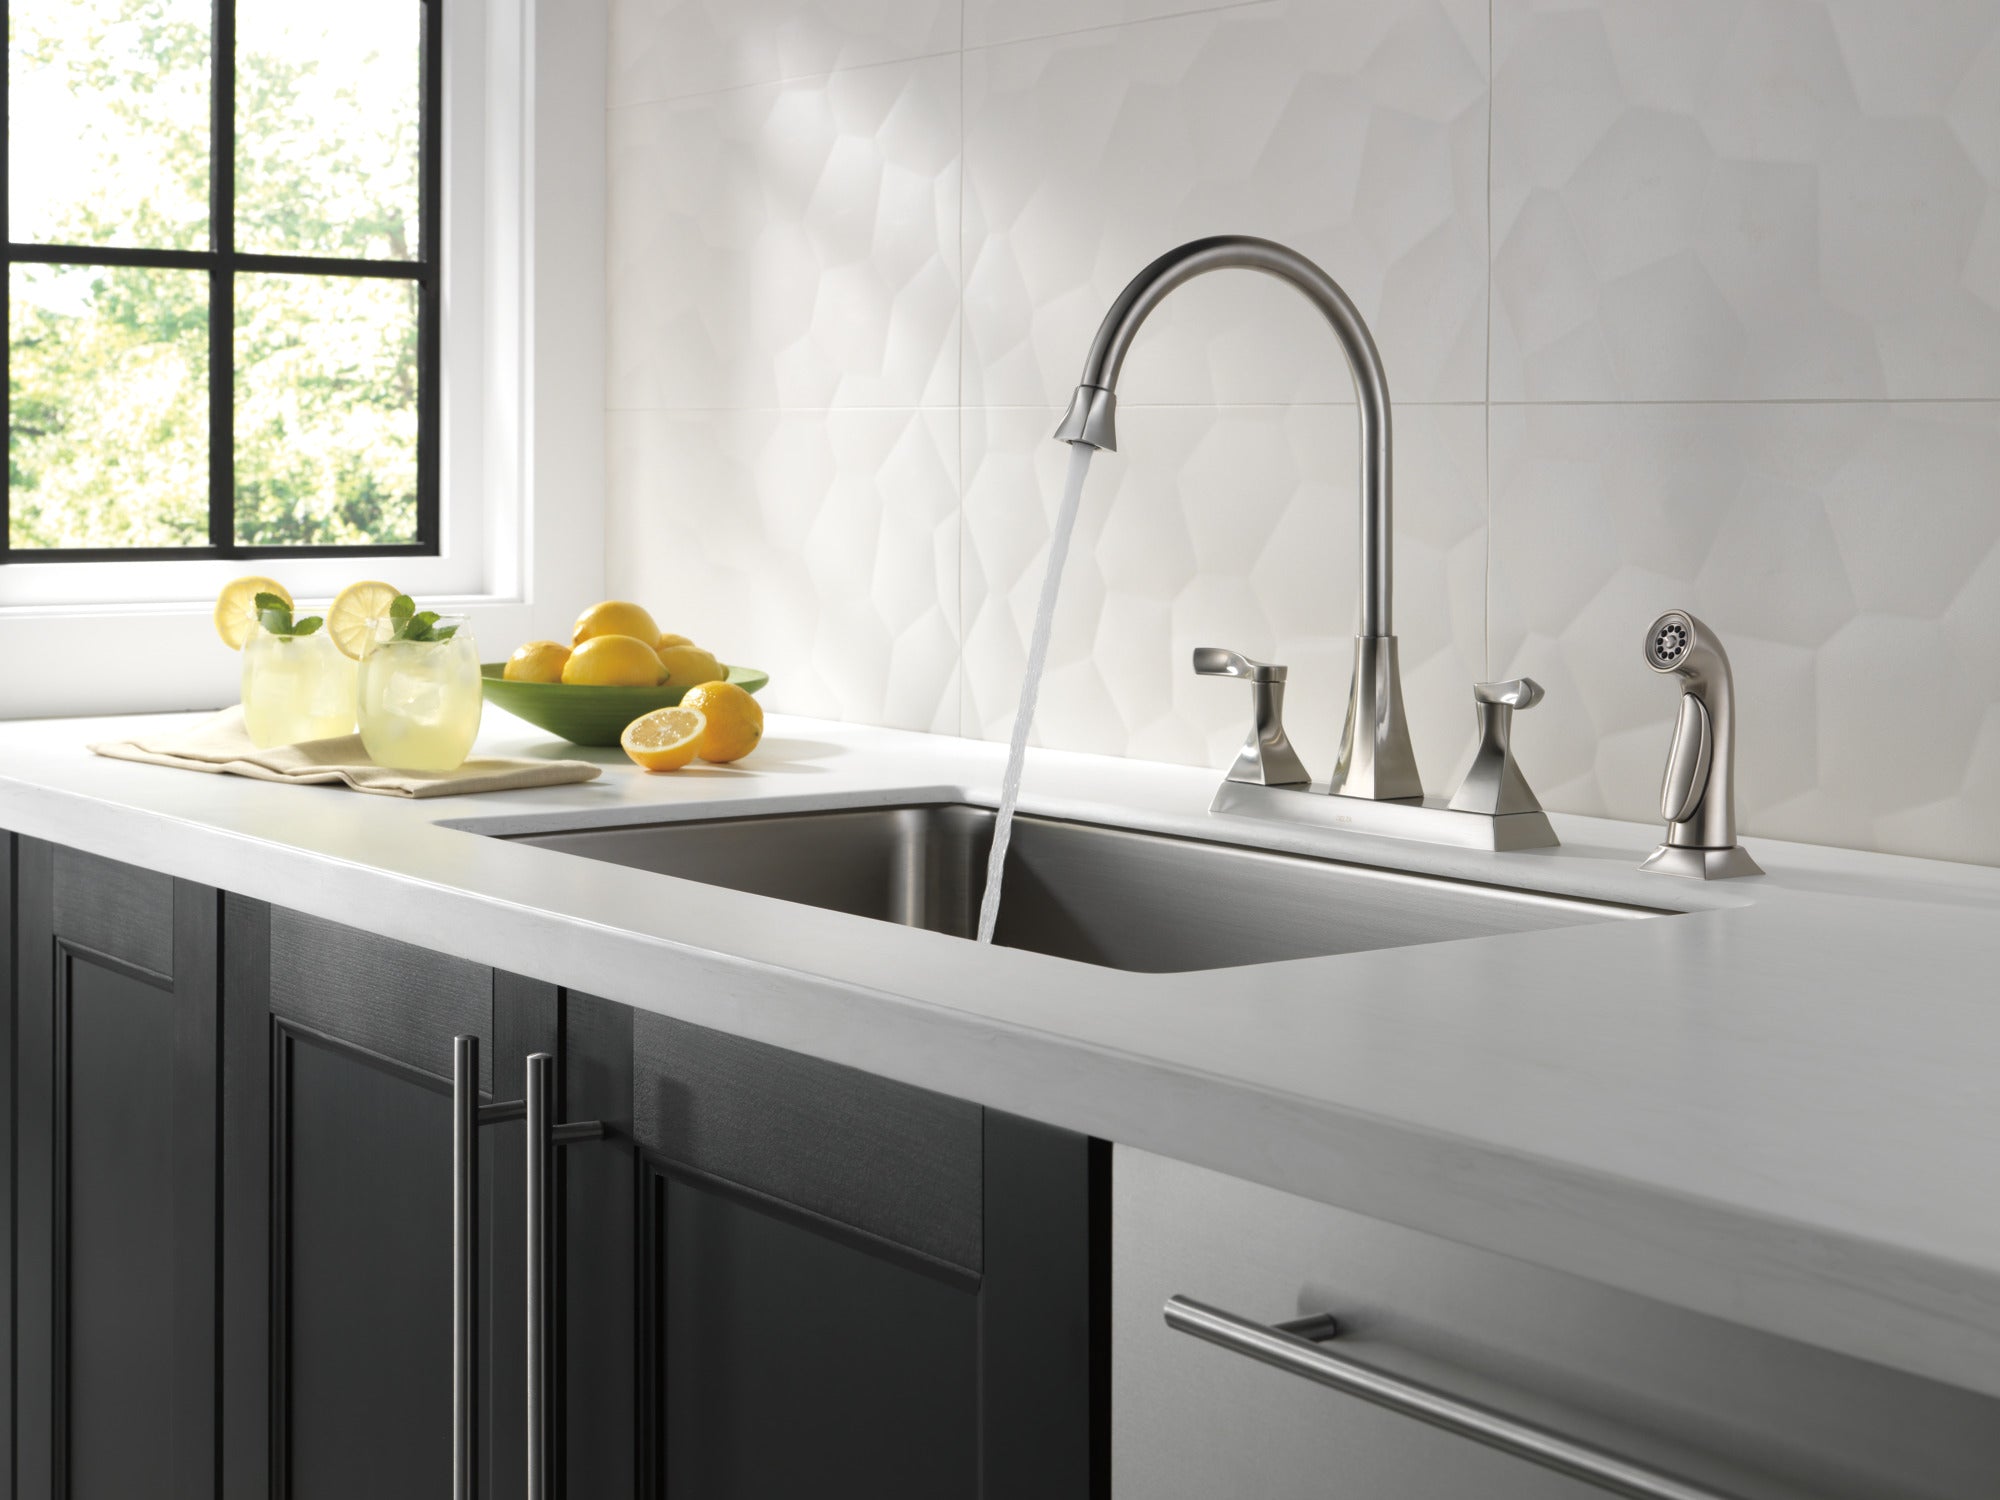 Delta Everly Kitchen Faucet with